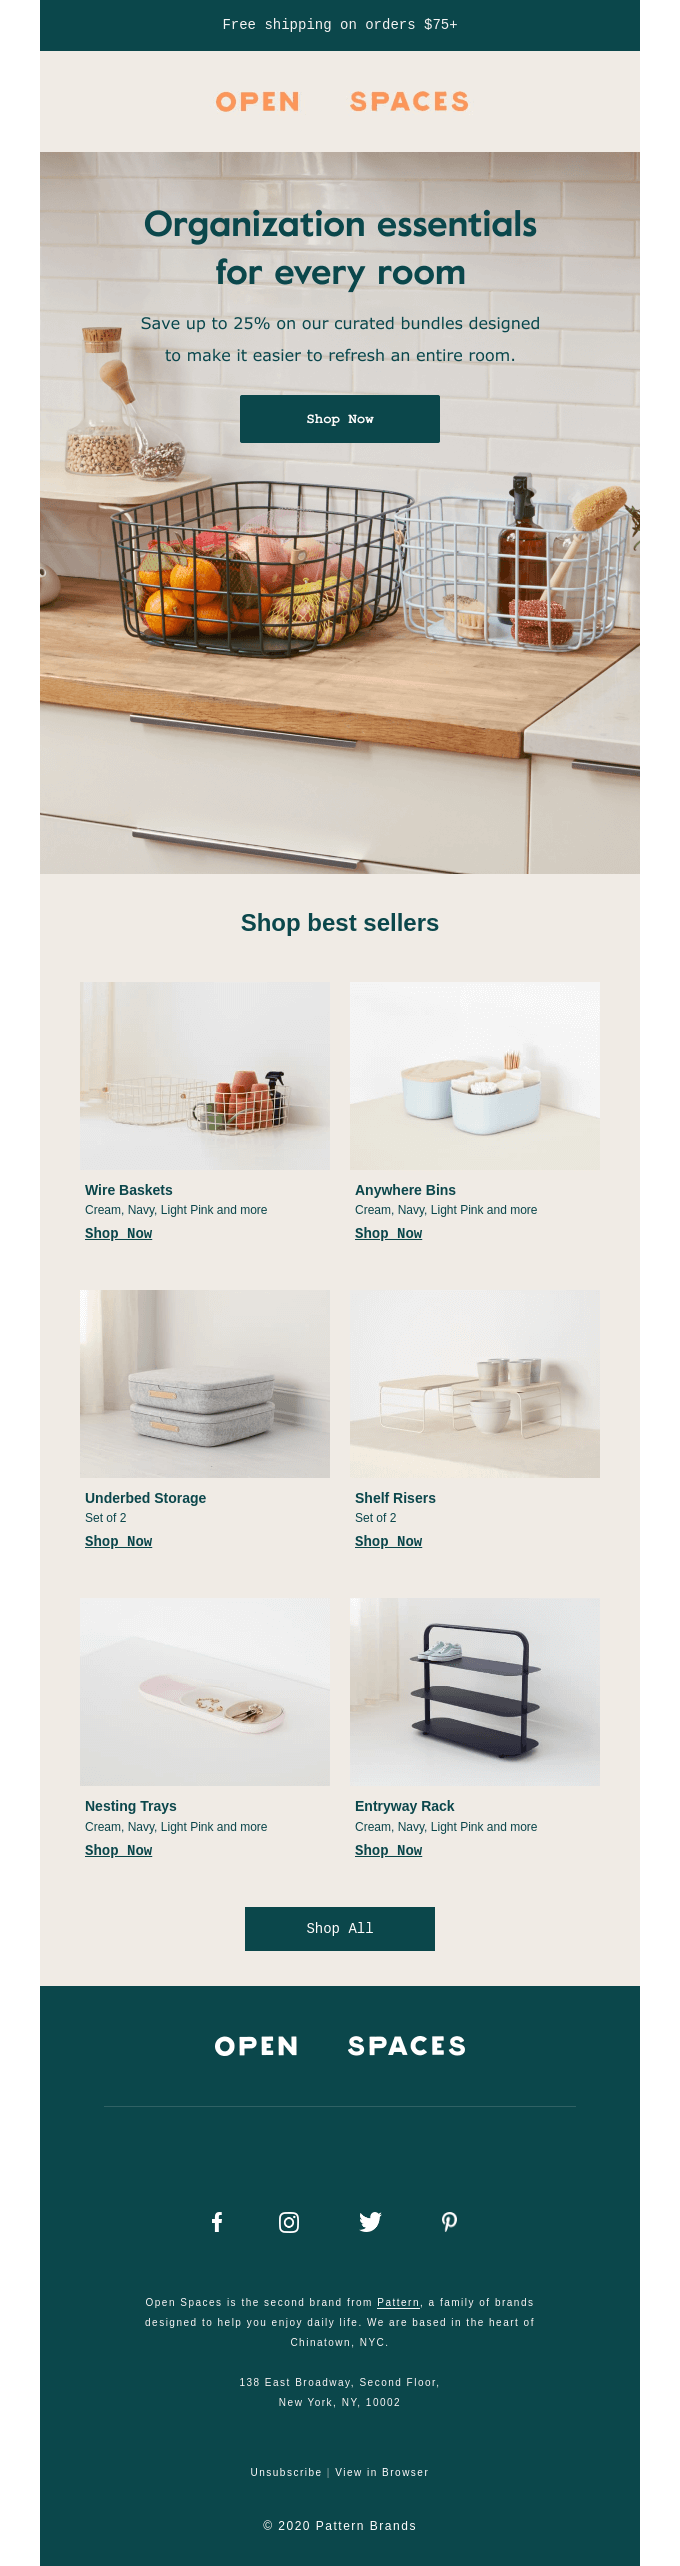 Save up to 25% on bundles ✨🏡